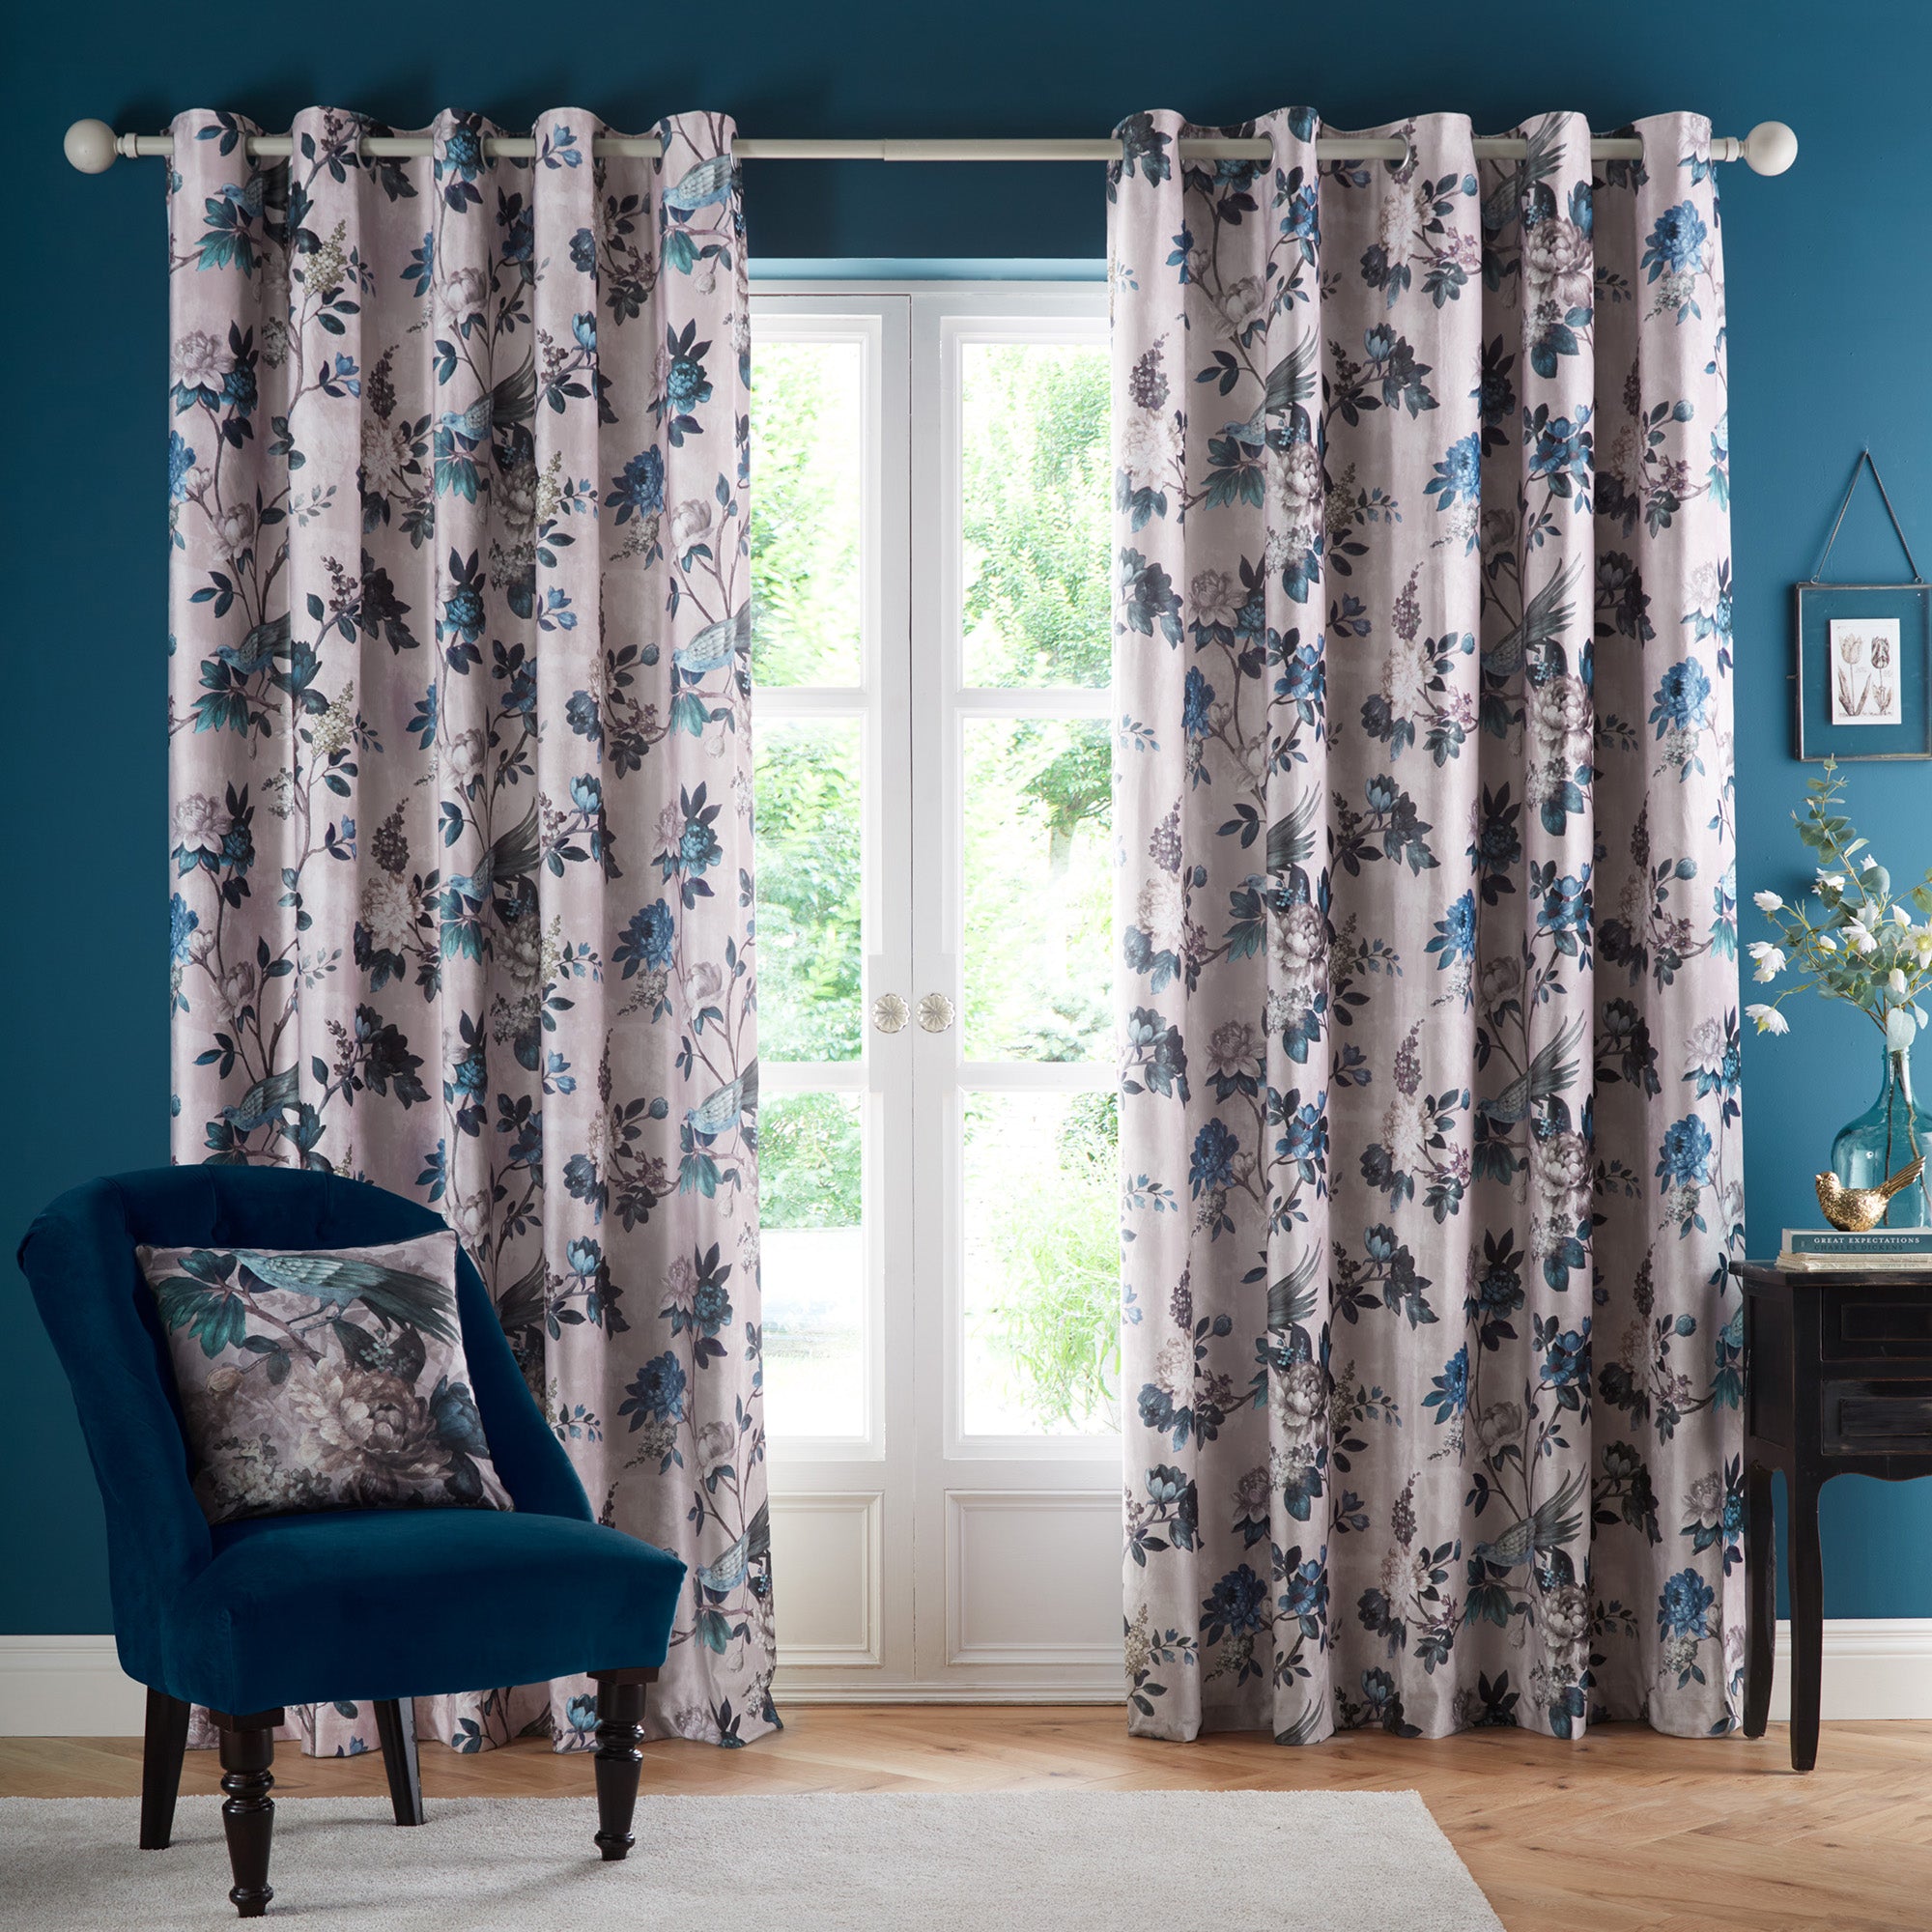 Appletree Windsford Ready Made Eyelet Curtains Teal | Excellent Price ...